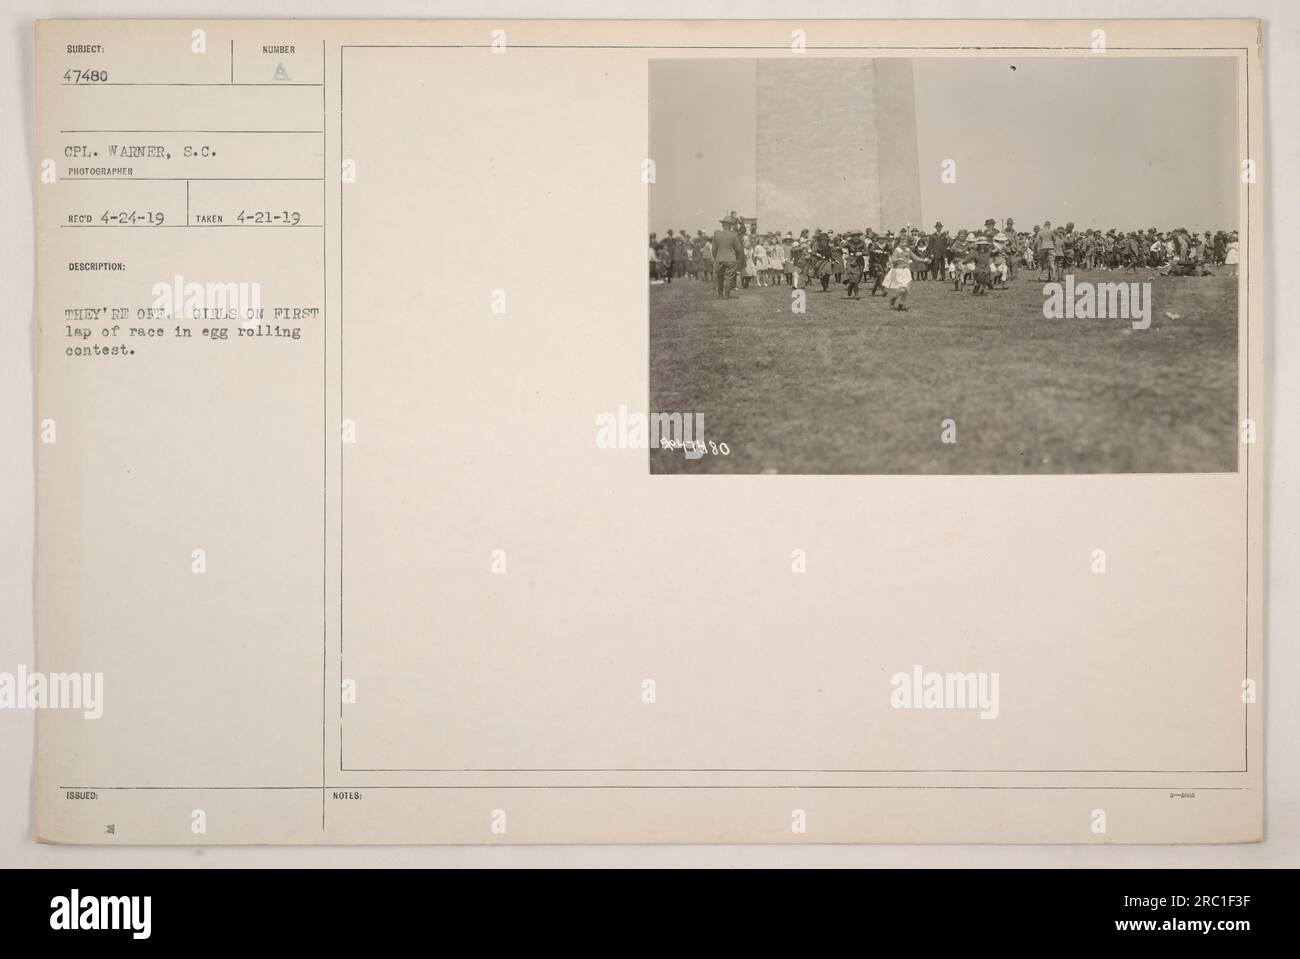 Girls participating in an egg rolling contest are captured in this photograph. The image, taken by 47480 CPL. Warner on April 21, 1919, shows the girls starting their first lap of the race. This description belongs to the collection of photographs documenting American military activities during World War One. Stock Photo